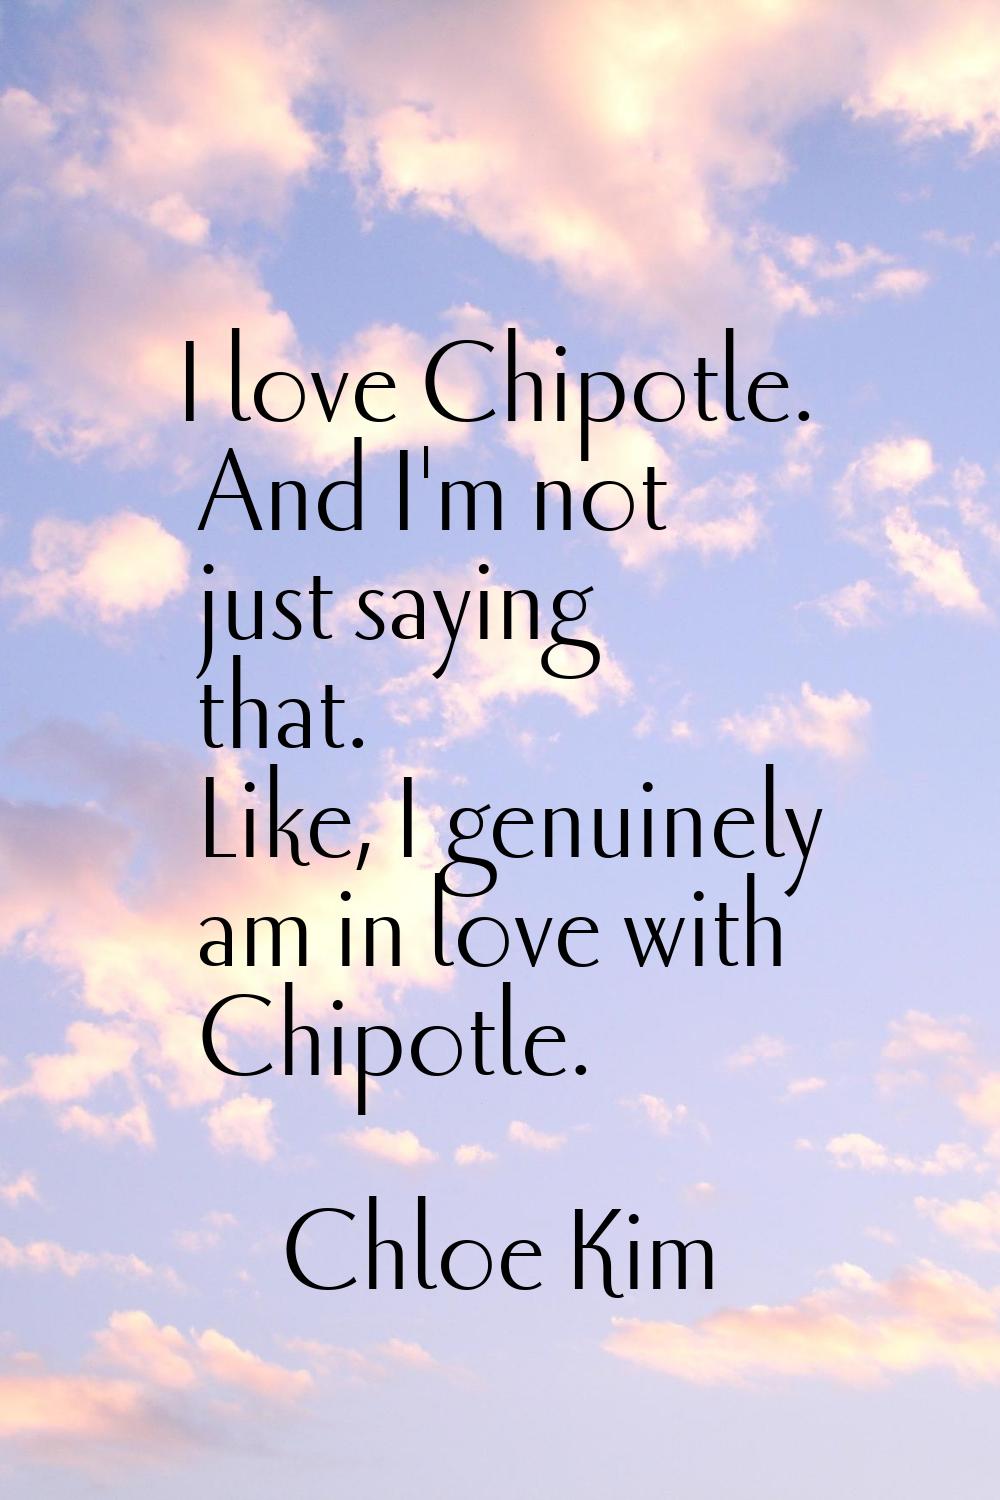 I love Chipotle. And I'm not just saying that. Like, I genuinely am in love with Chipotle.